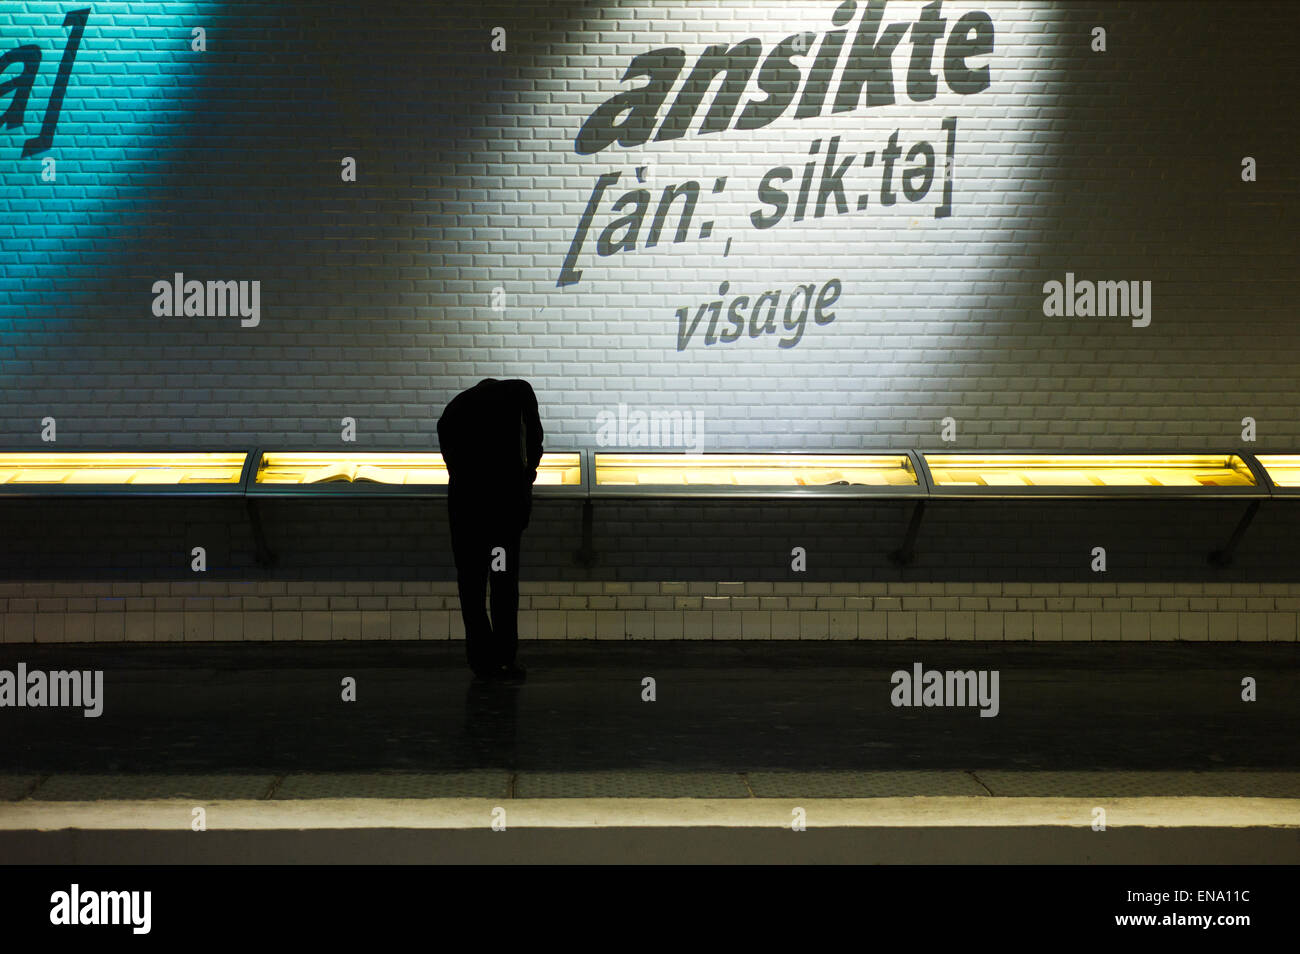 Silhouette of man leaning down to watch something in a subway art exhibit (where the head is not shown). Stock Photo